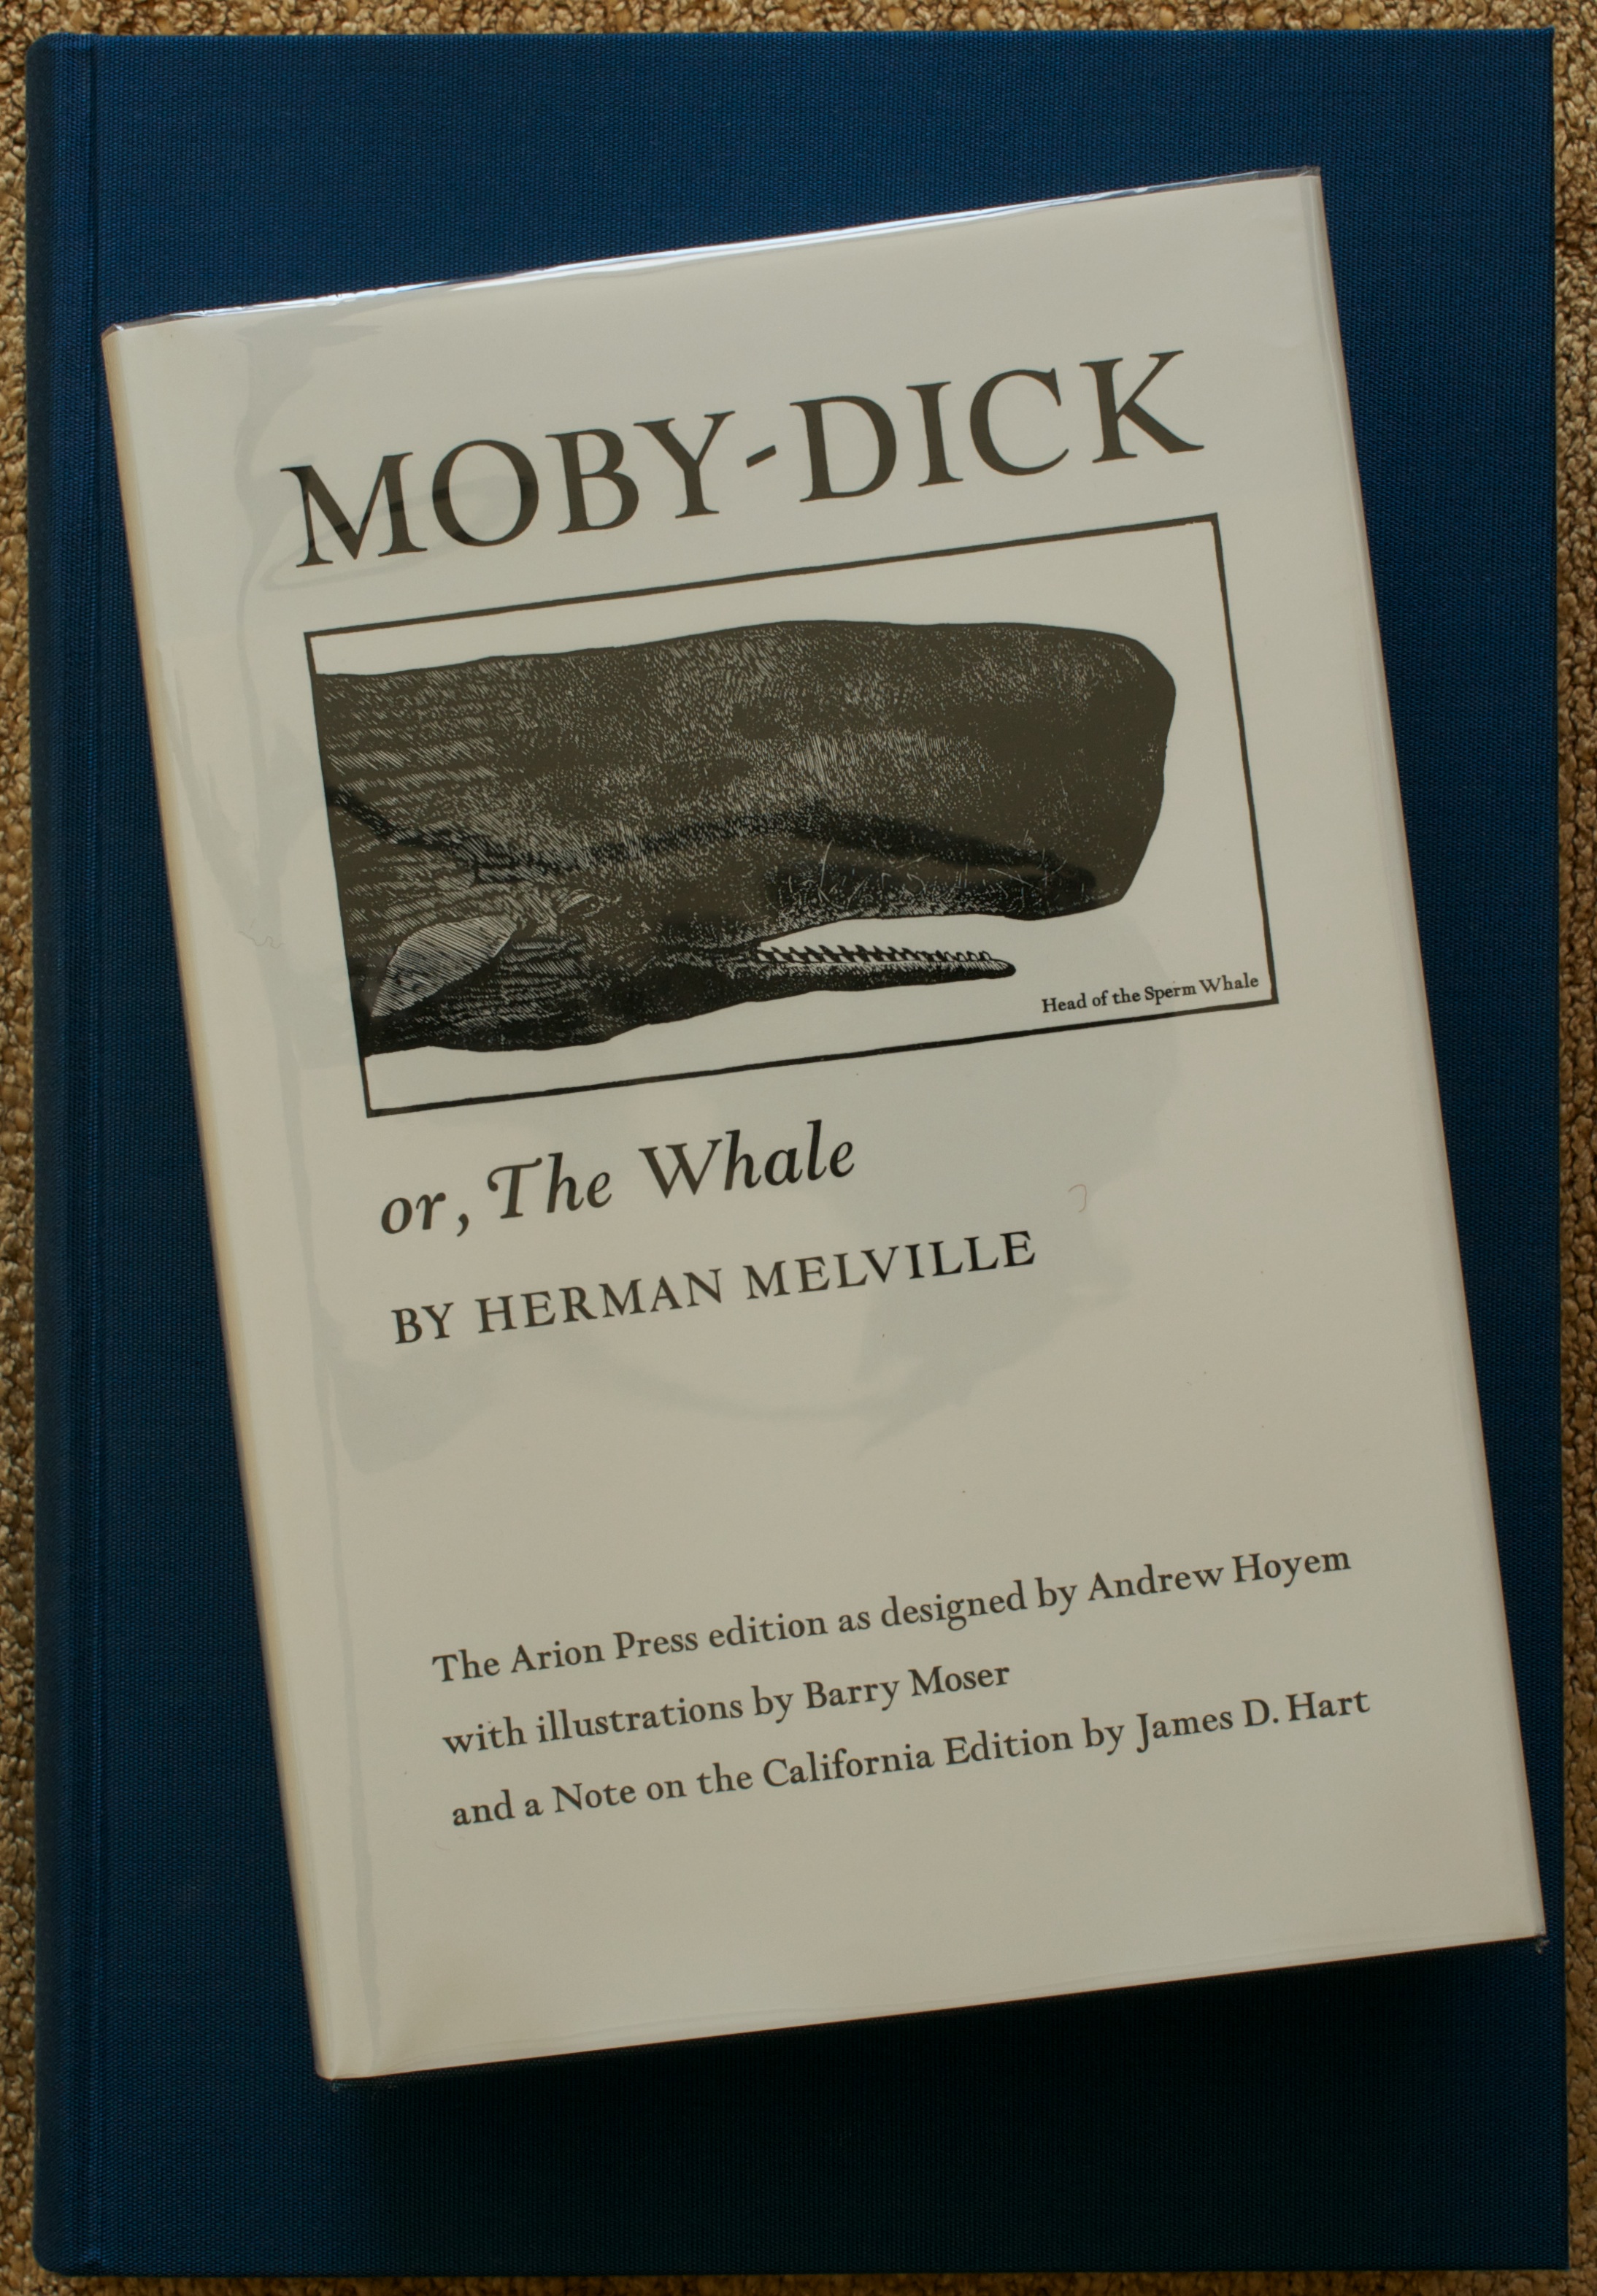 Moby dick published